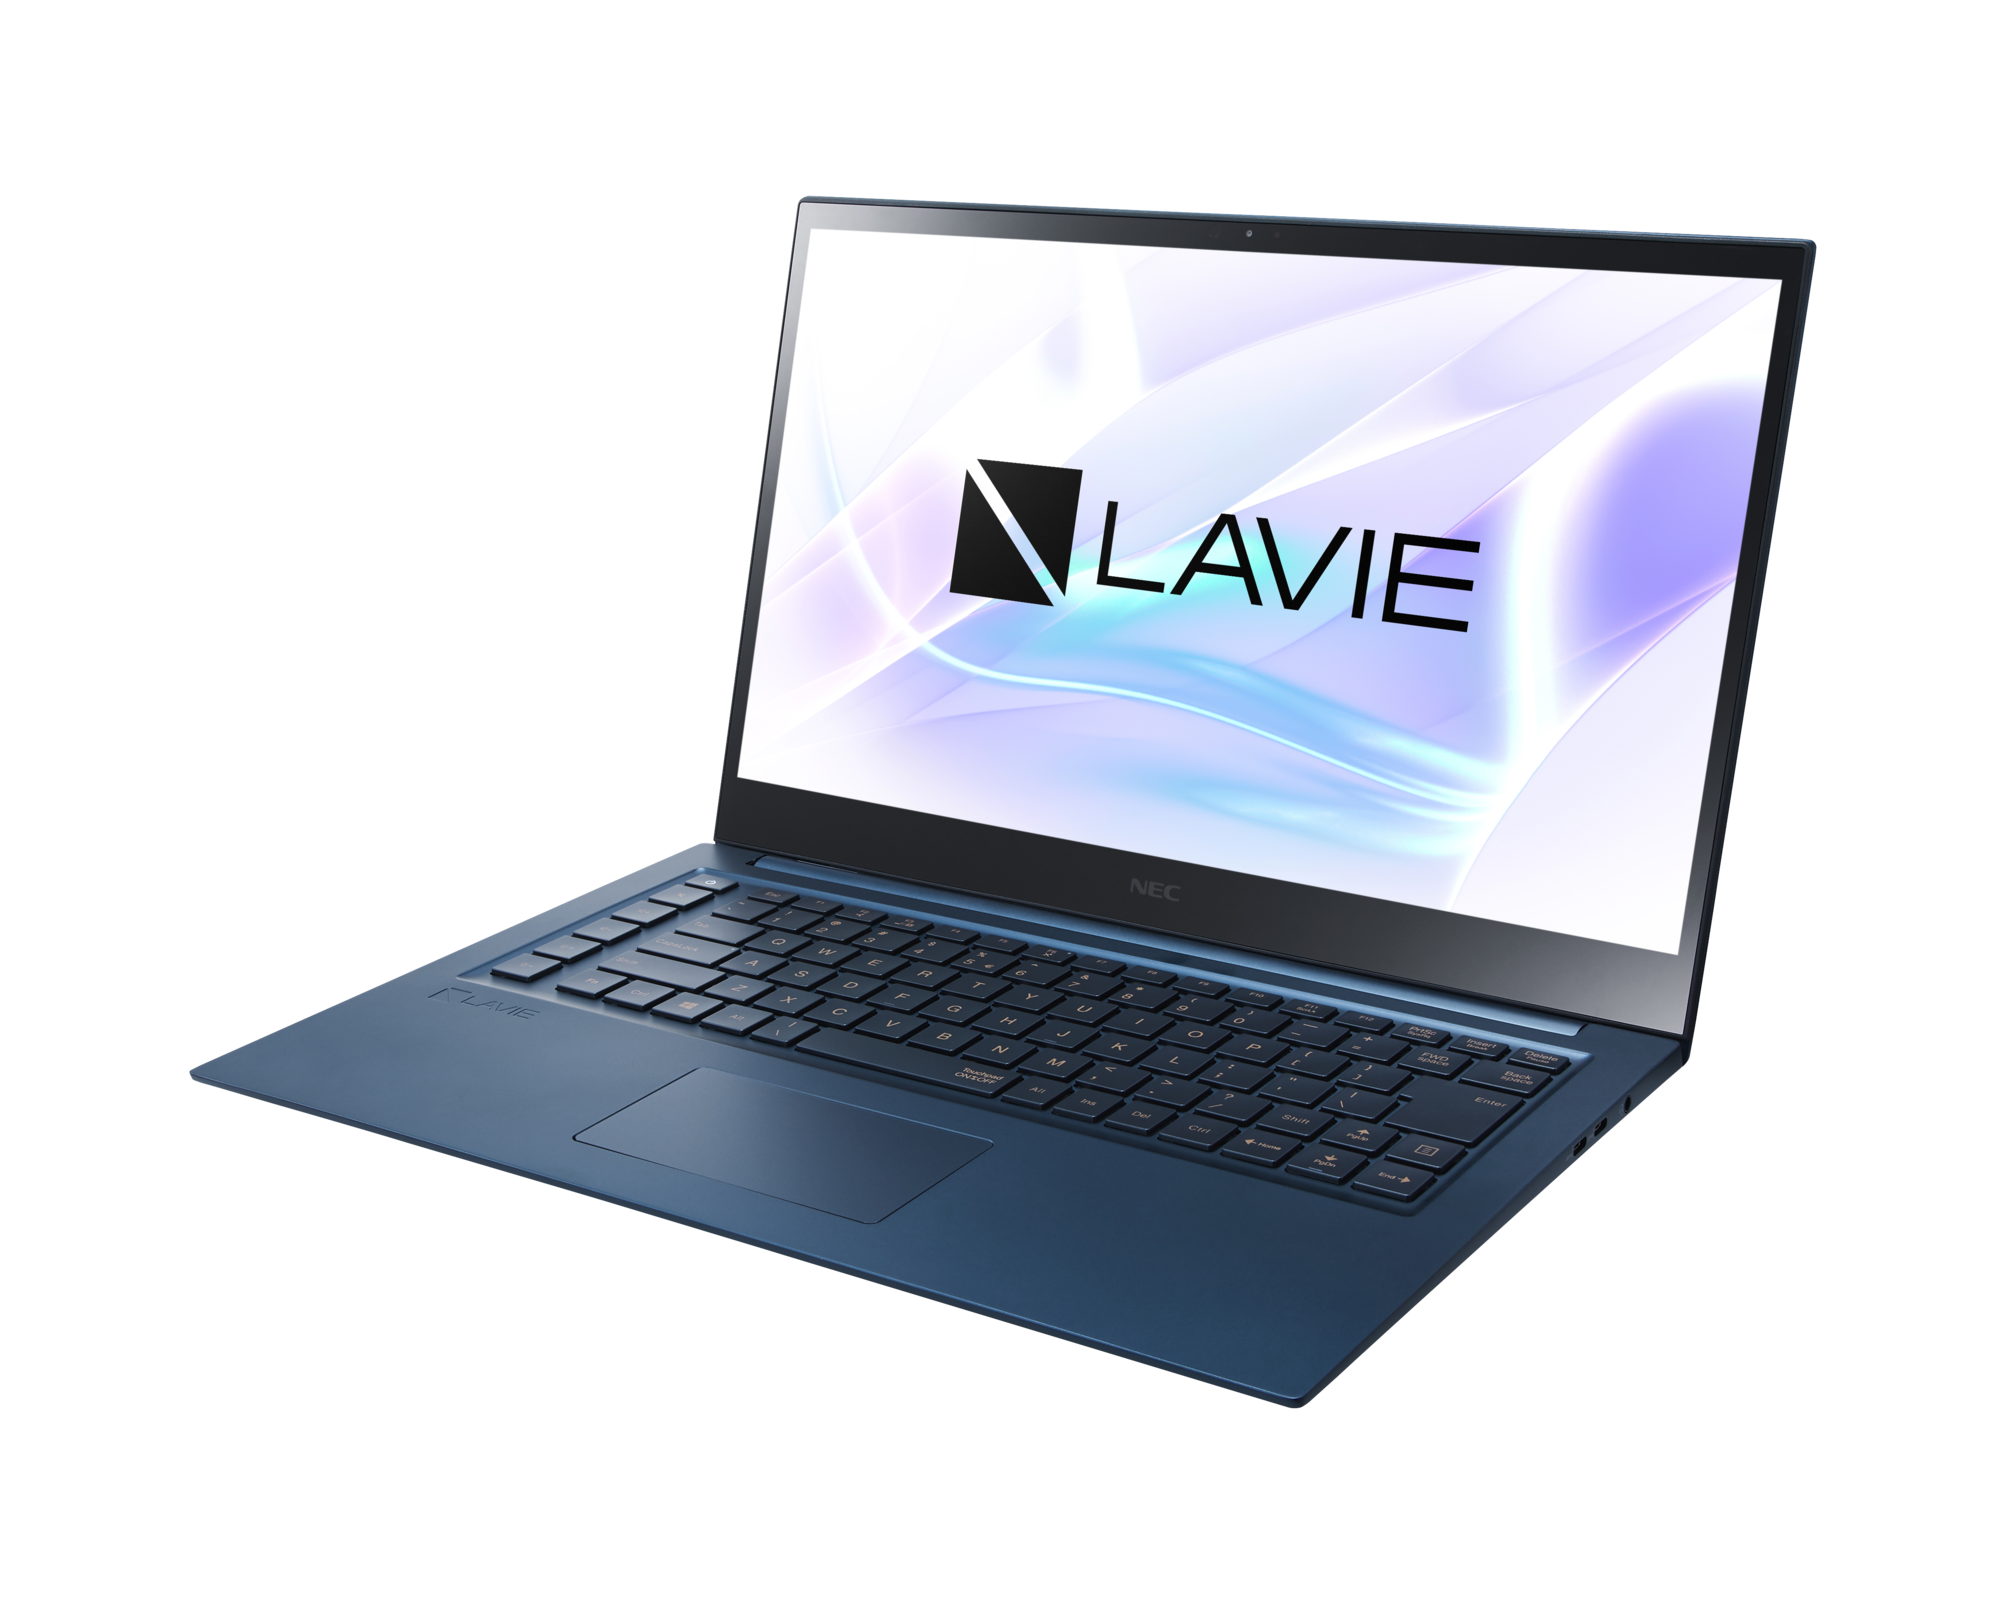 PC/タブレット ノートPC The NEC Lavie Vega is a thin-and-light 4K laptop aimed at business 